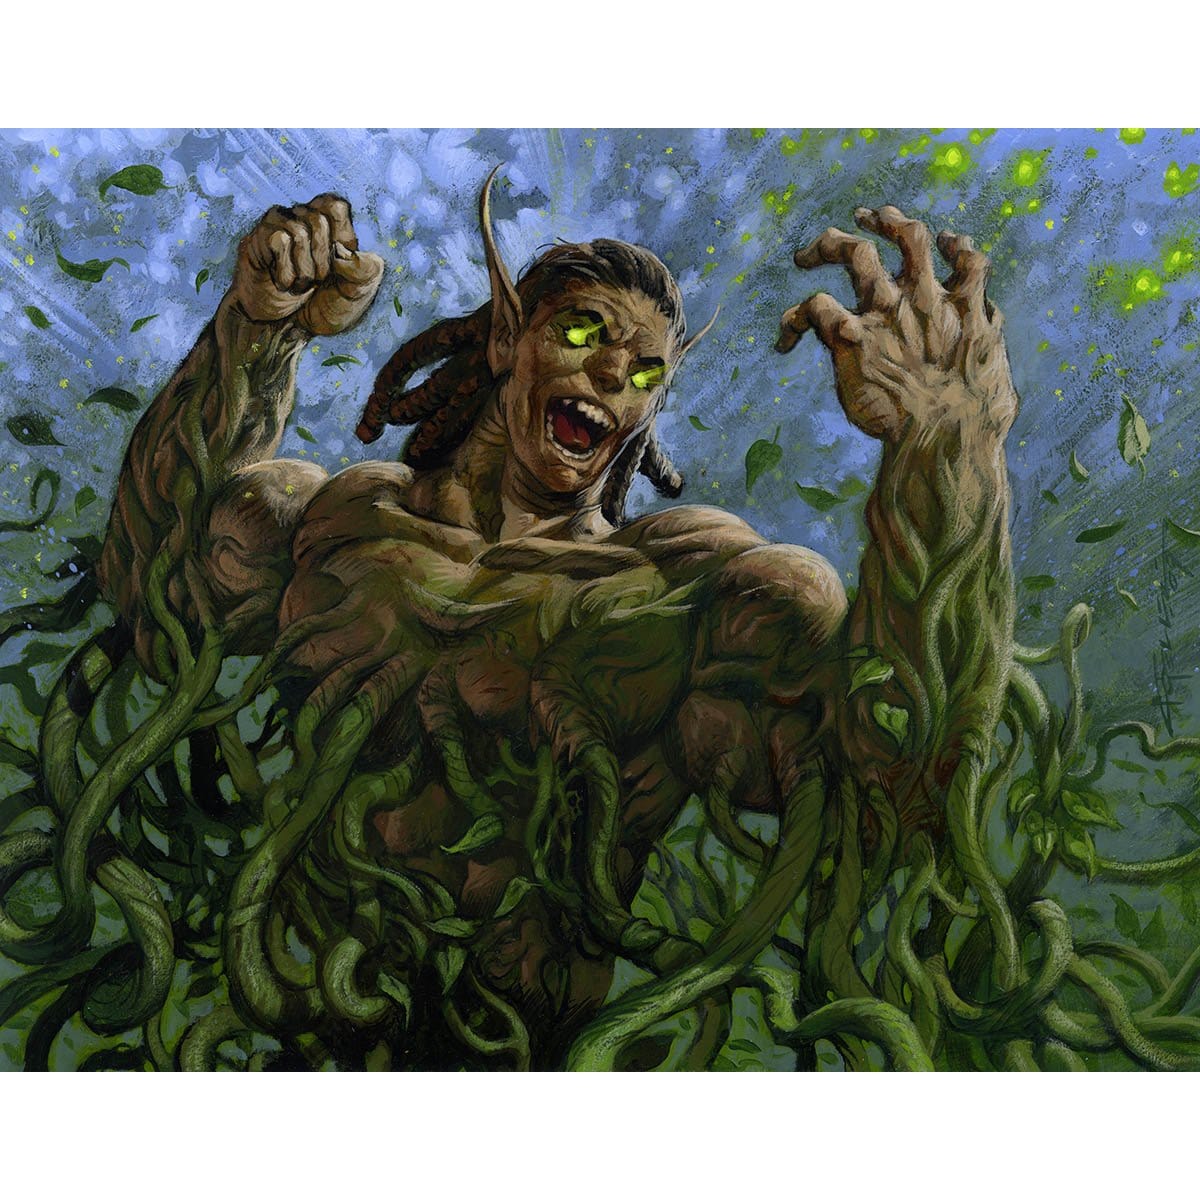 Vines of Vastwood Print - Print - Original Magic Art - Accessories for Magic the Gathering and other card games